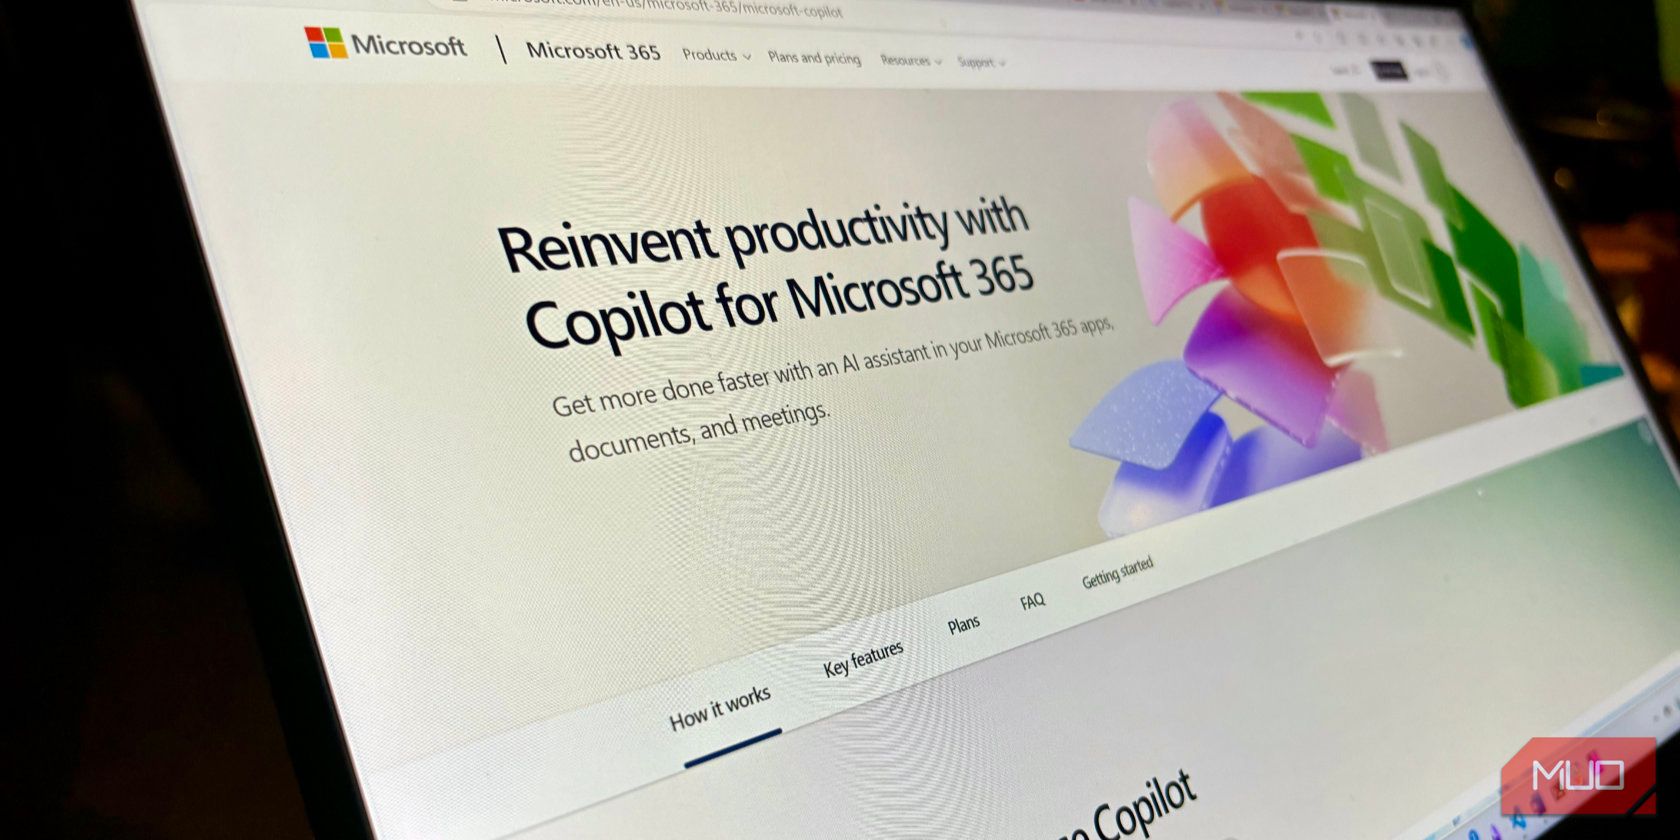 Copilot for Microsoft 365 on a laptop screen